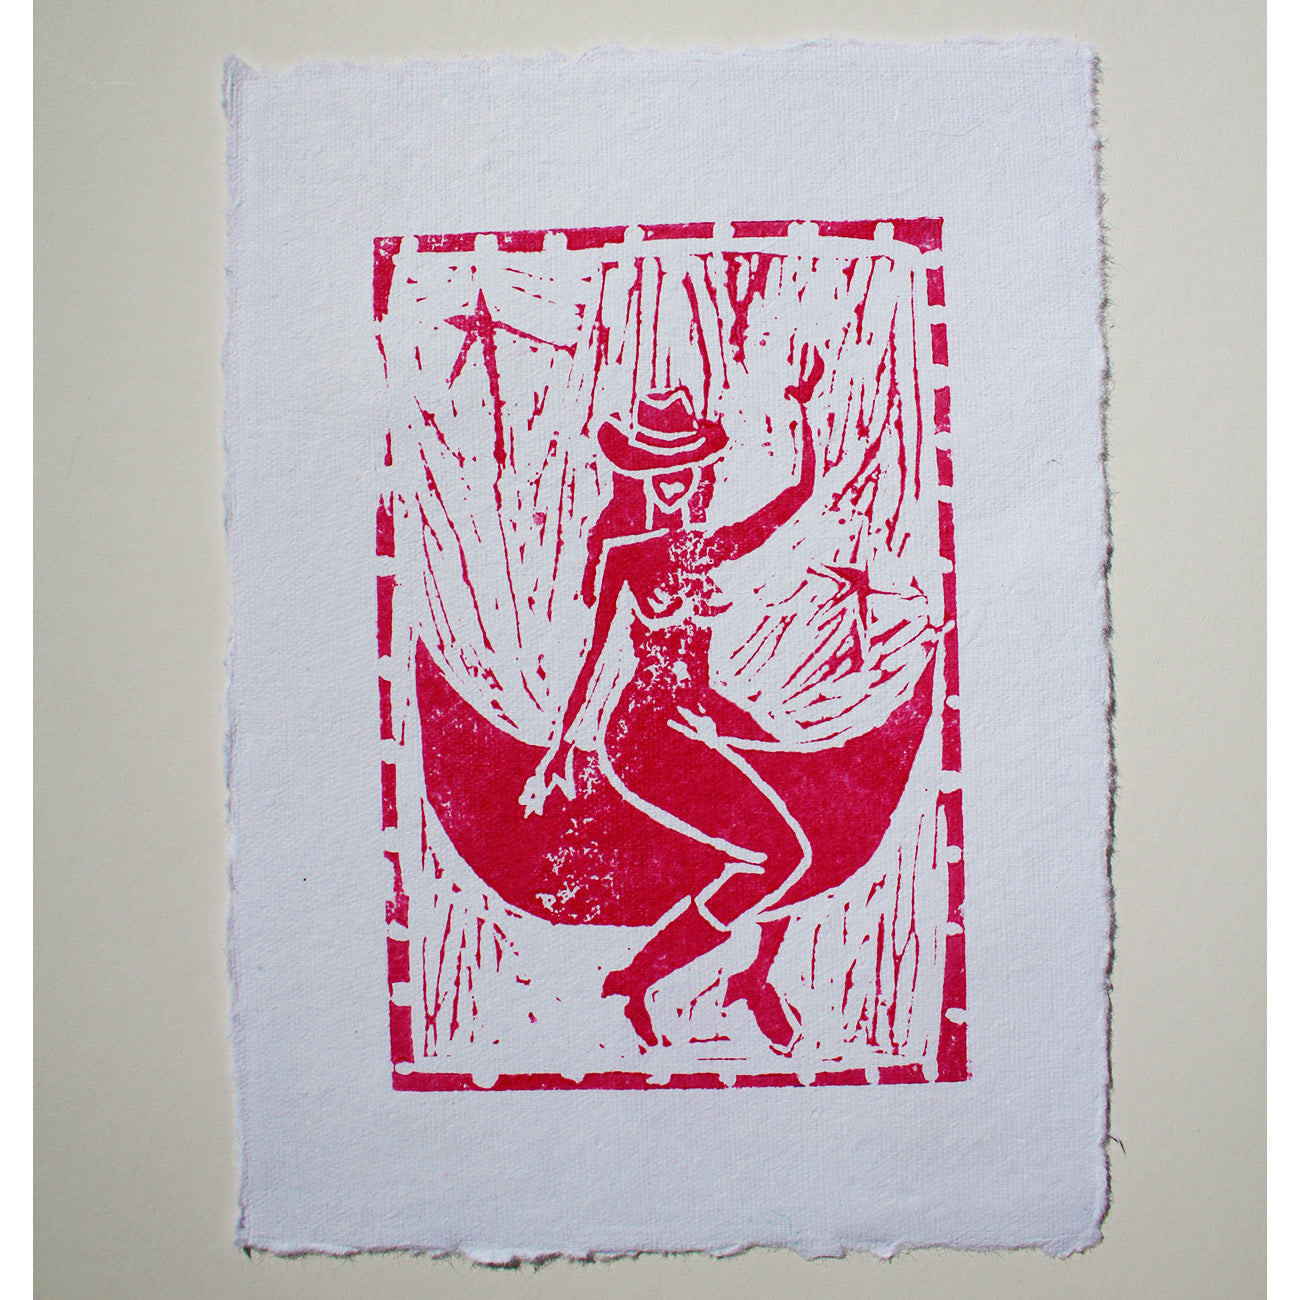 Space Cowgirl Lino Print